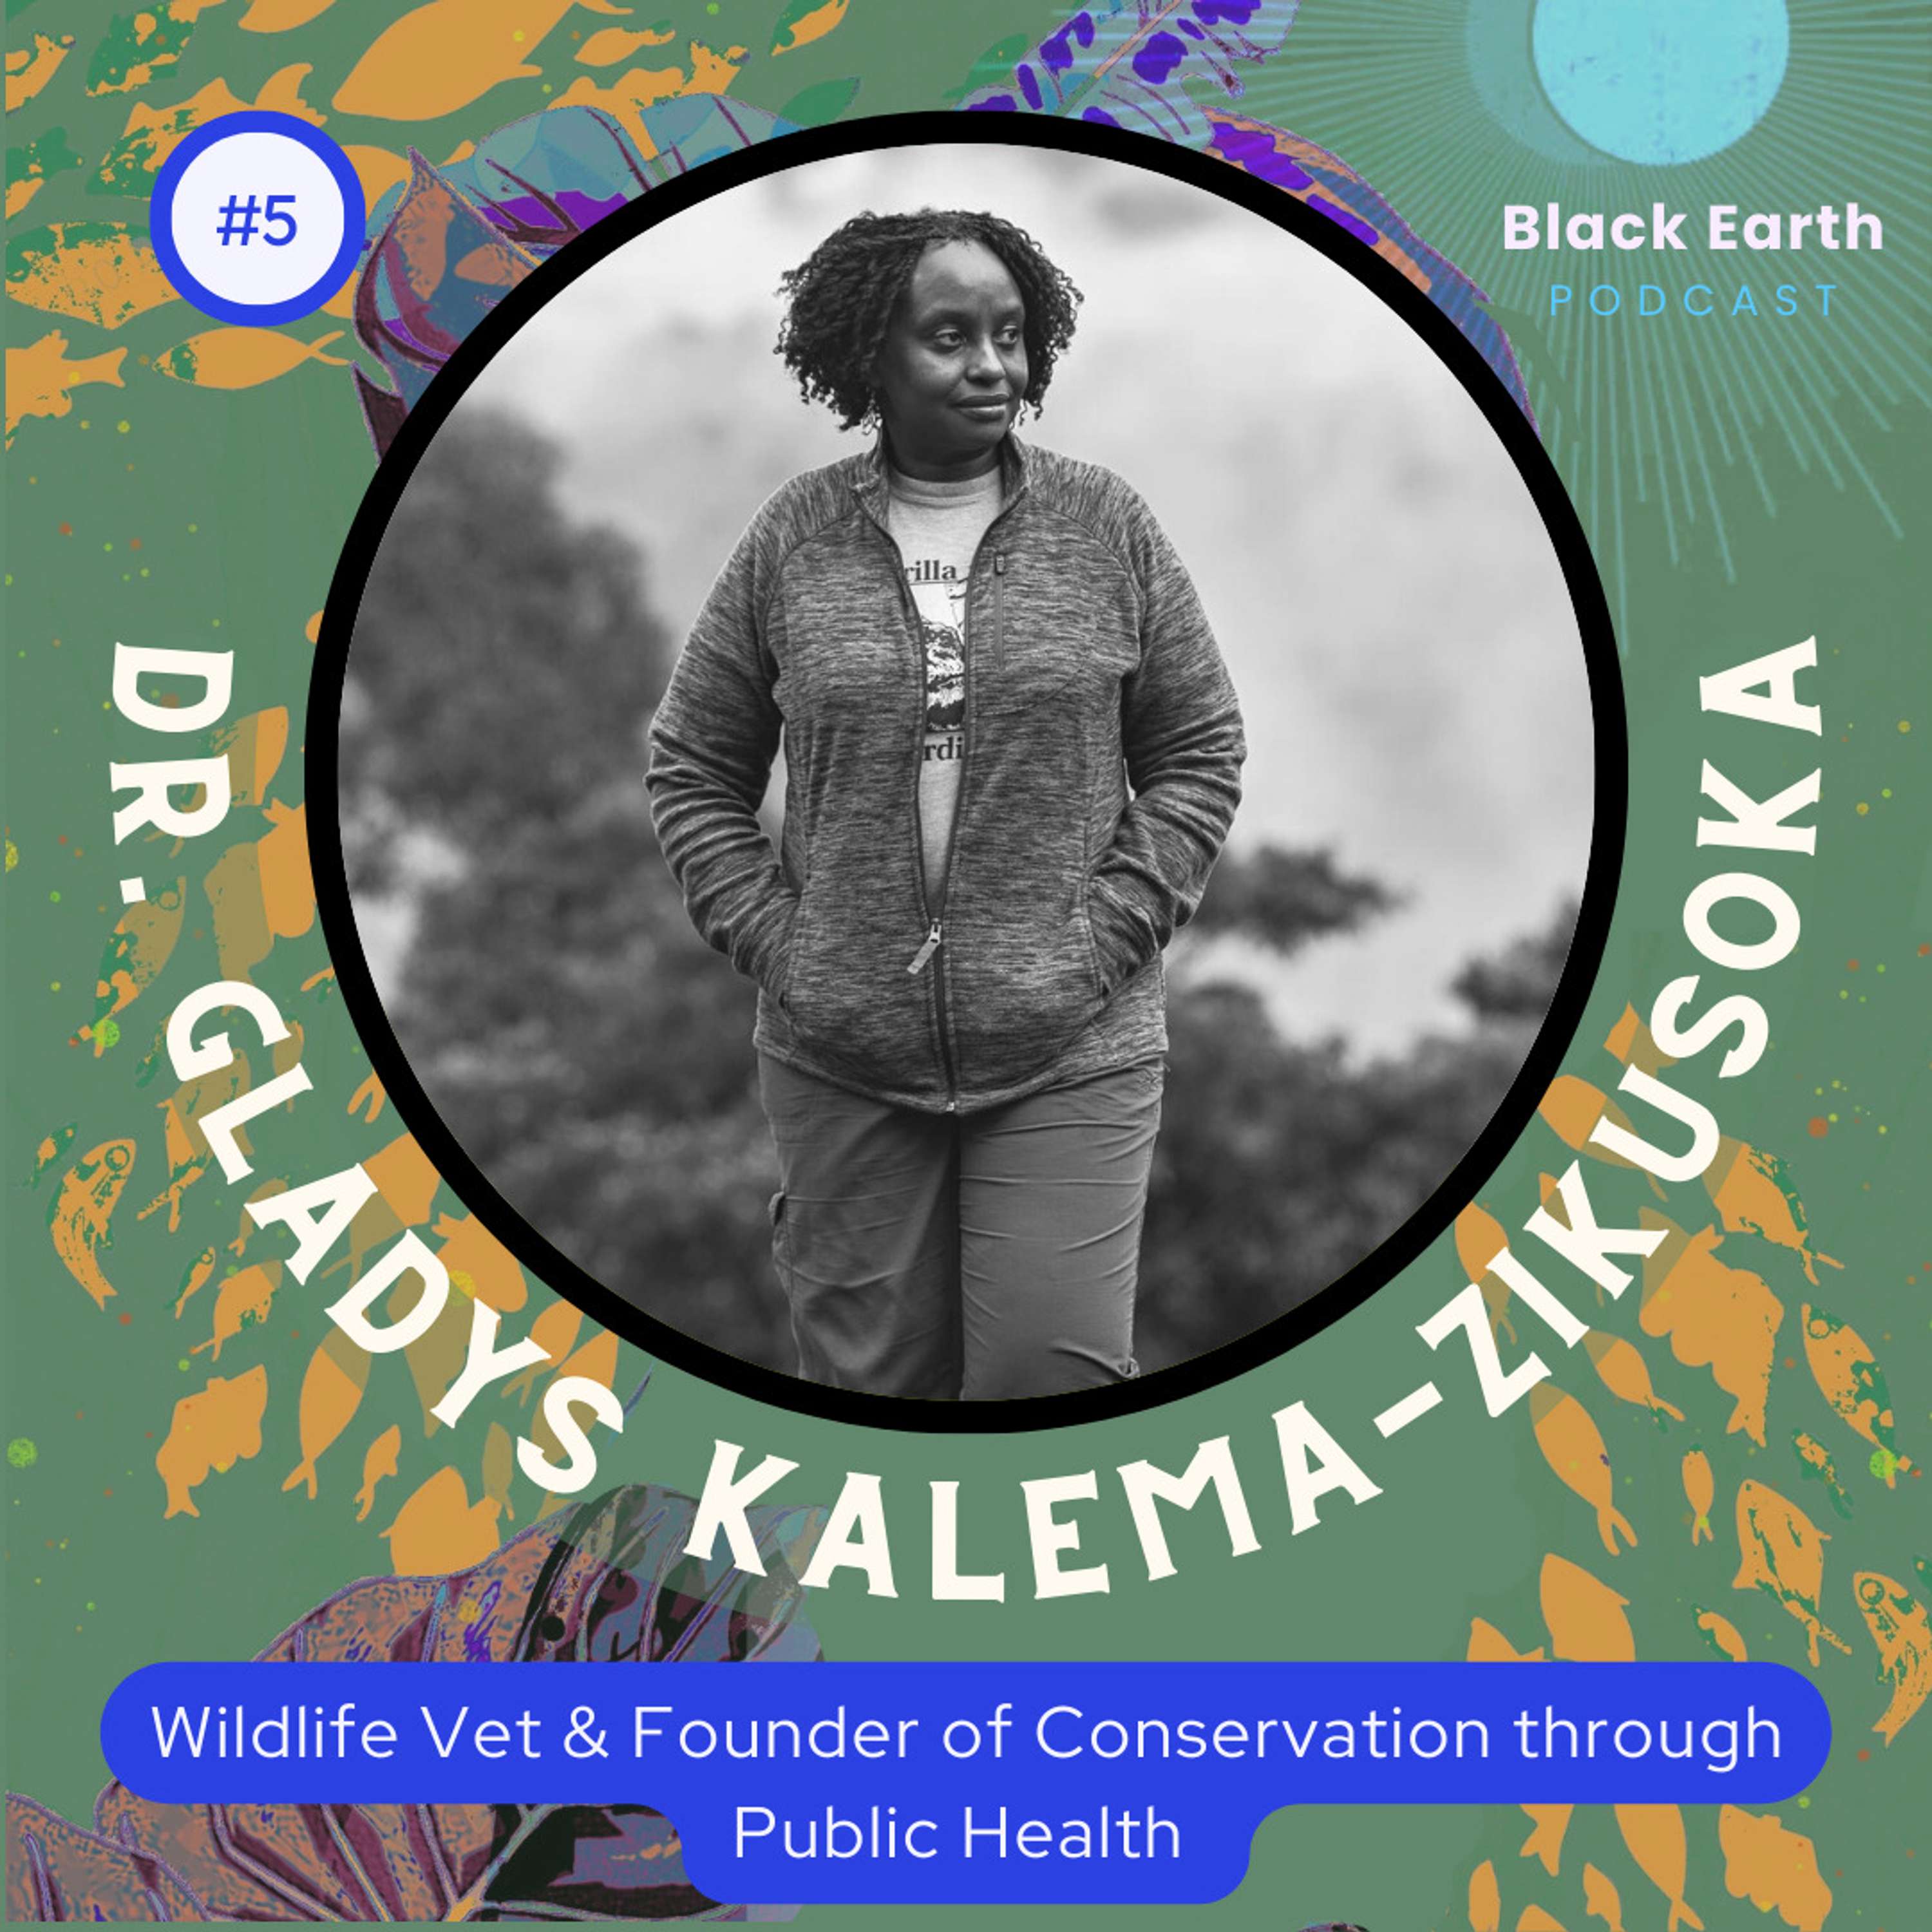 How gorillas and communities can live in harmony with Dr. Gladys Kalema-Zikusoka